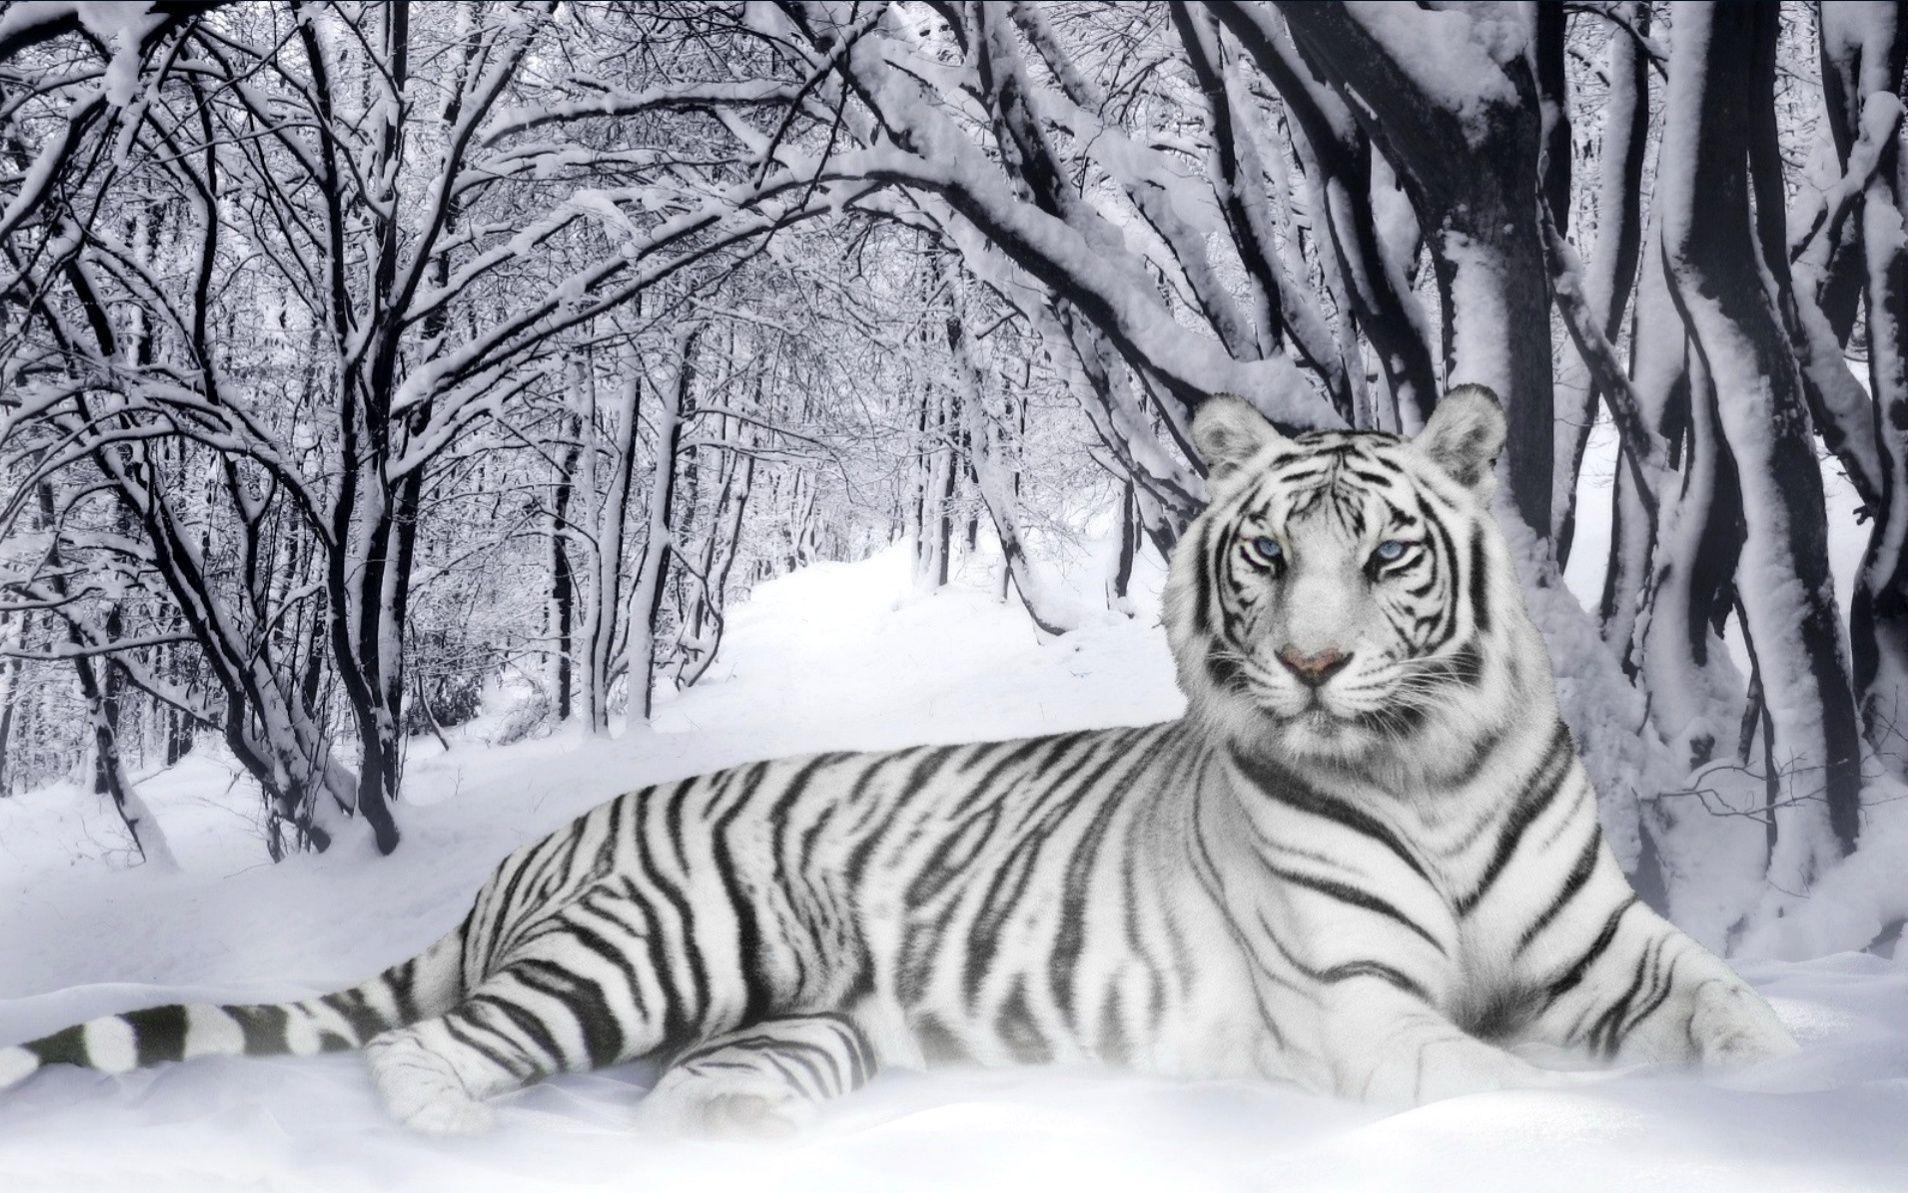 White Tiger Laying Down in the Snowy Forest Wallpaper and Photo